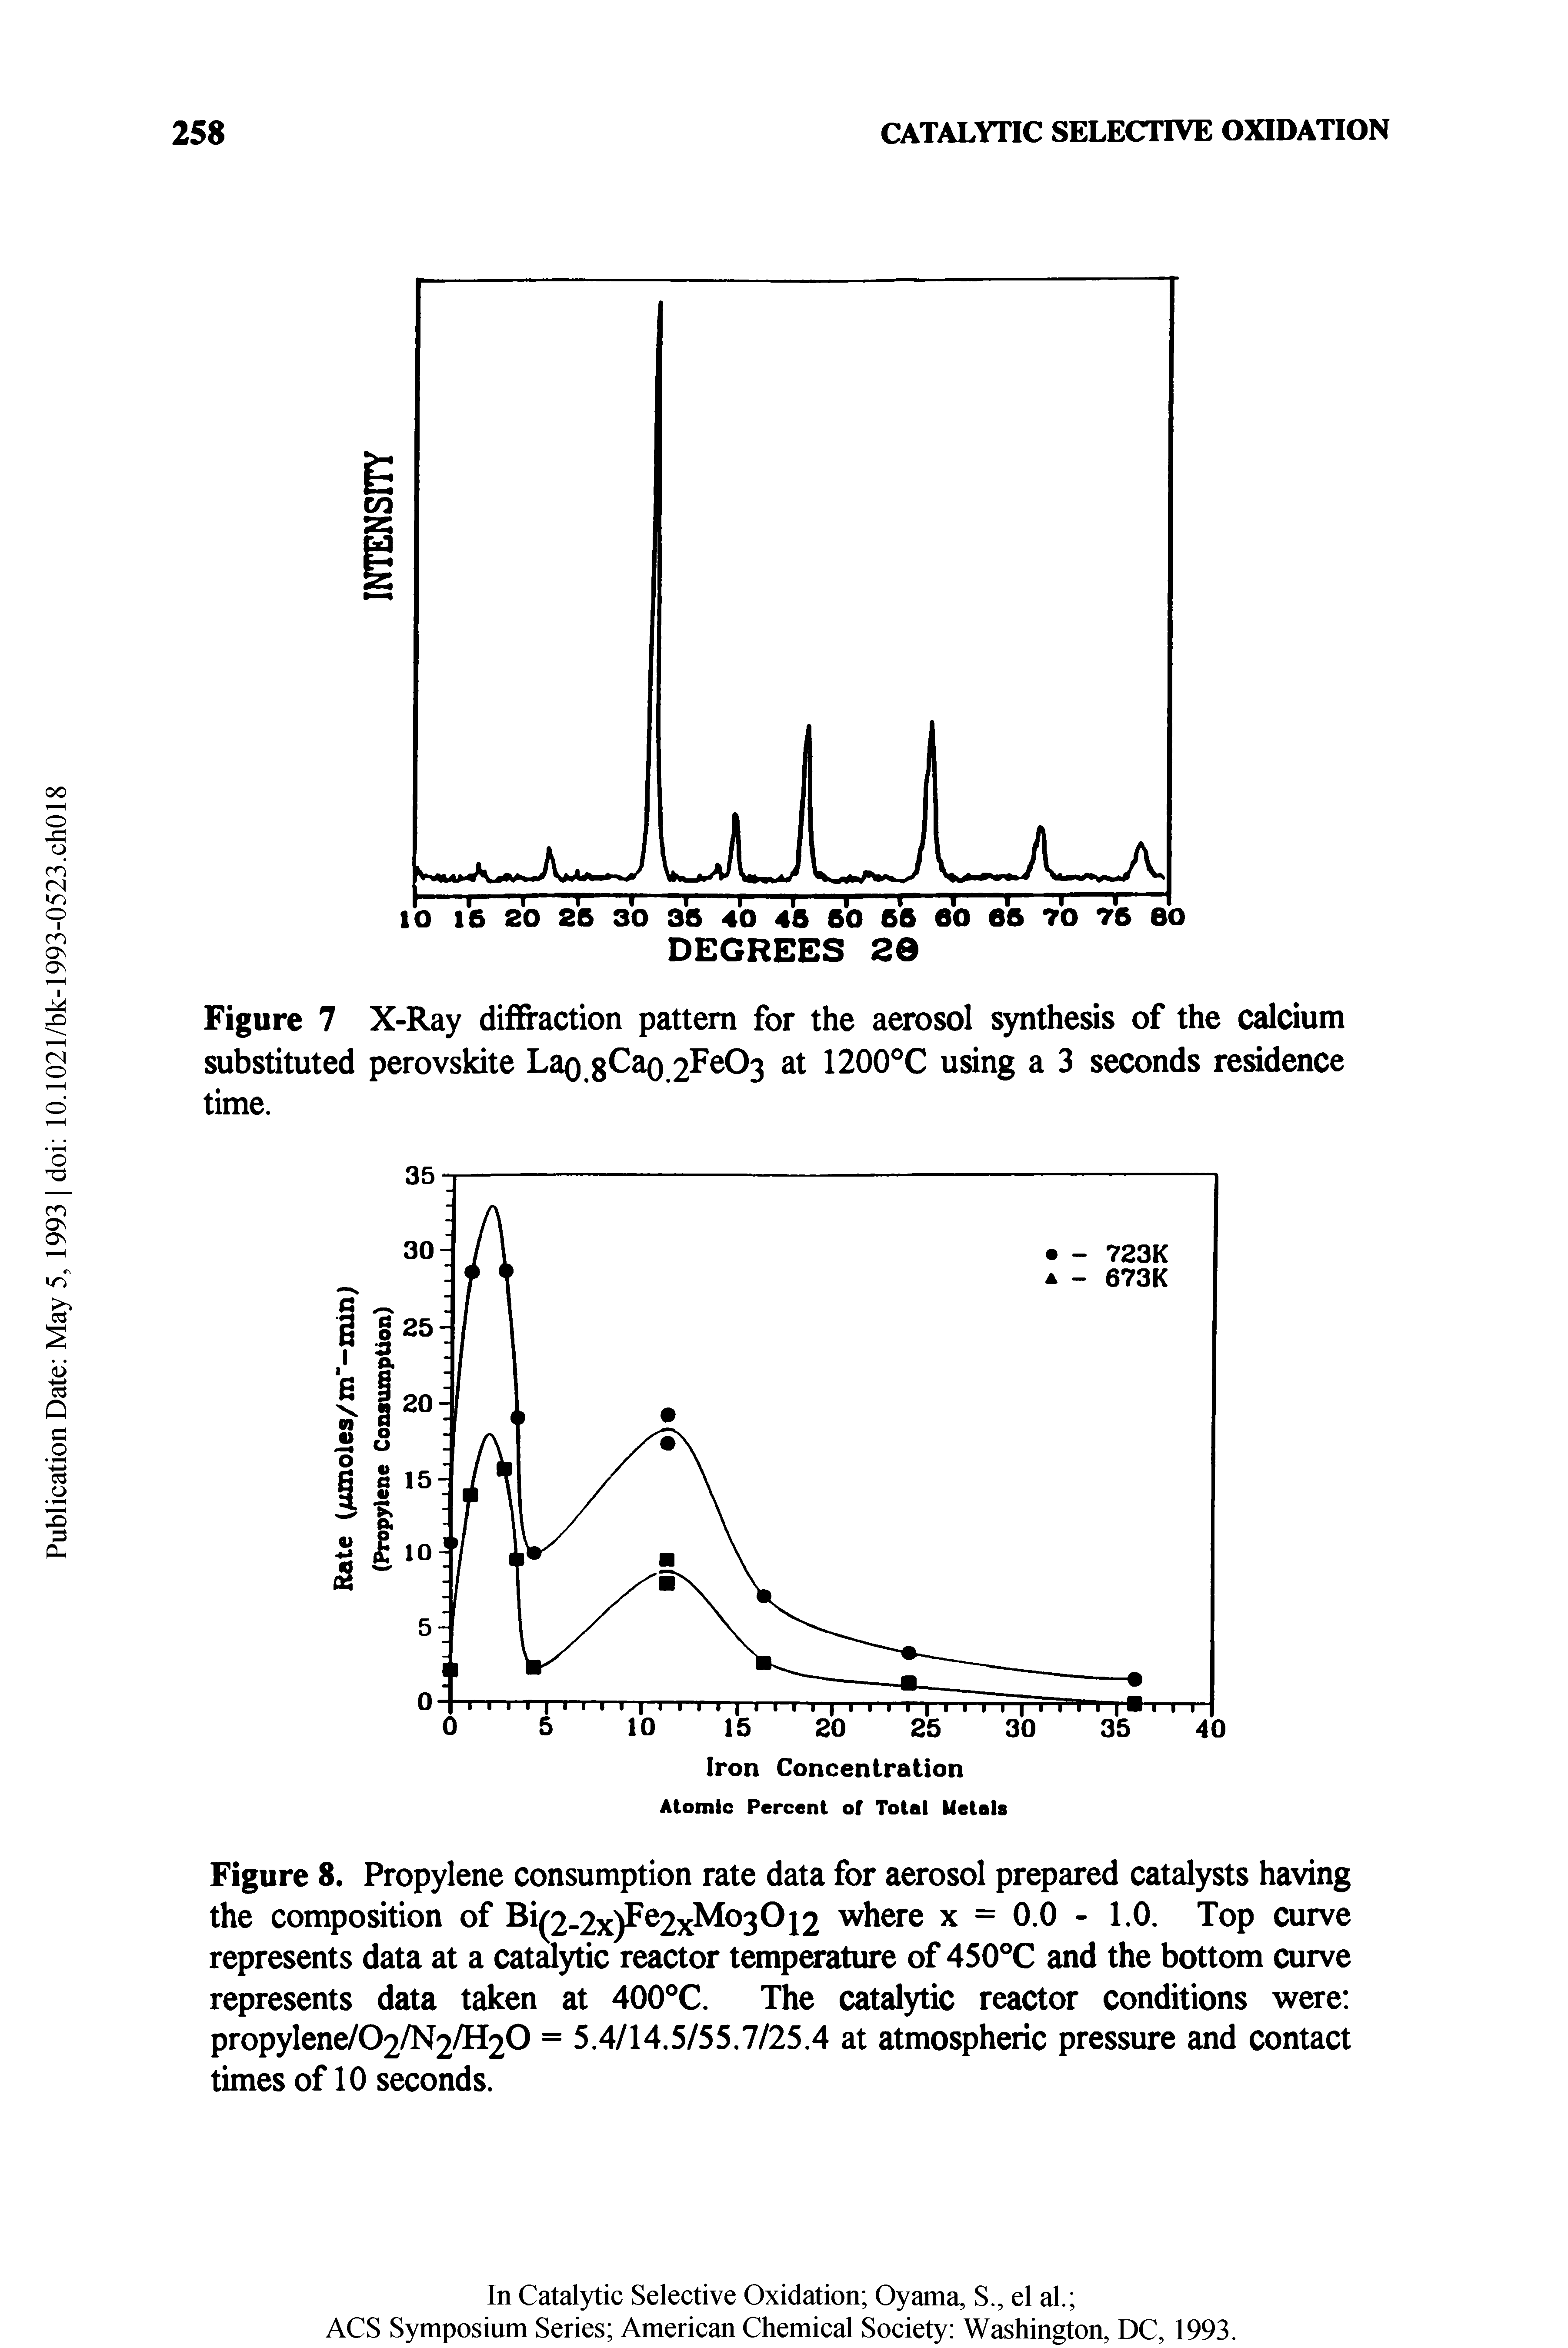 Figure 7 X-Ray diffraction pattern for the aerosol synthesis of the calcium substituted perovskite Lao.8Cao.2 03 at 1200°C using a 3 seconds residence time.